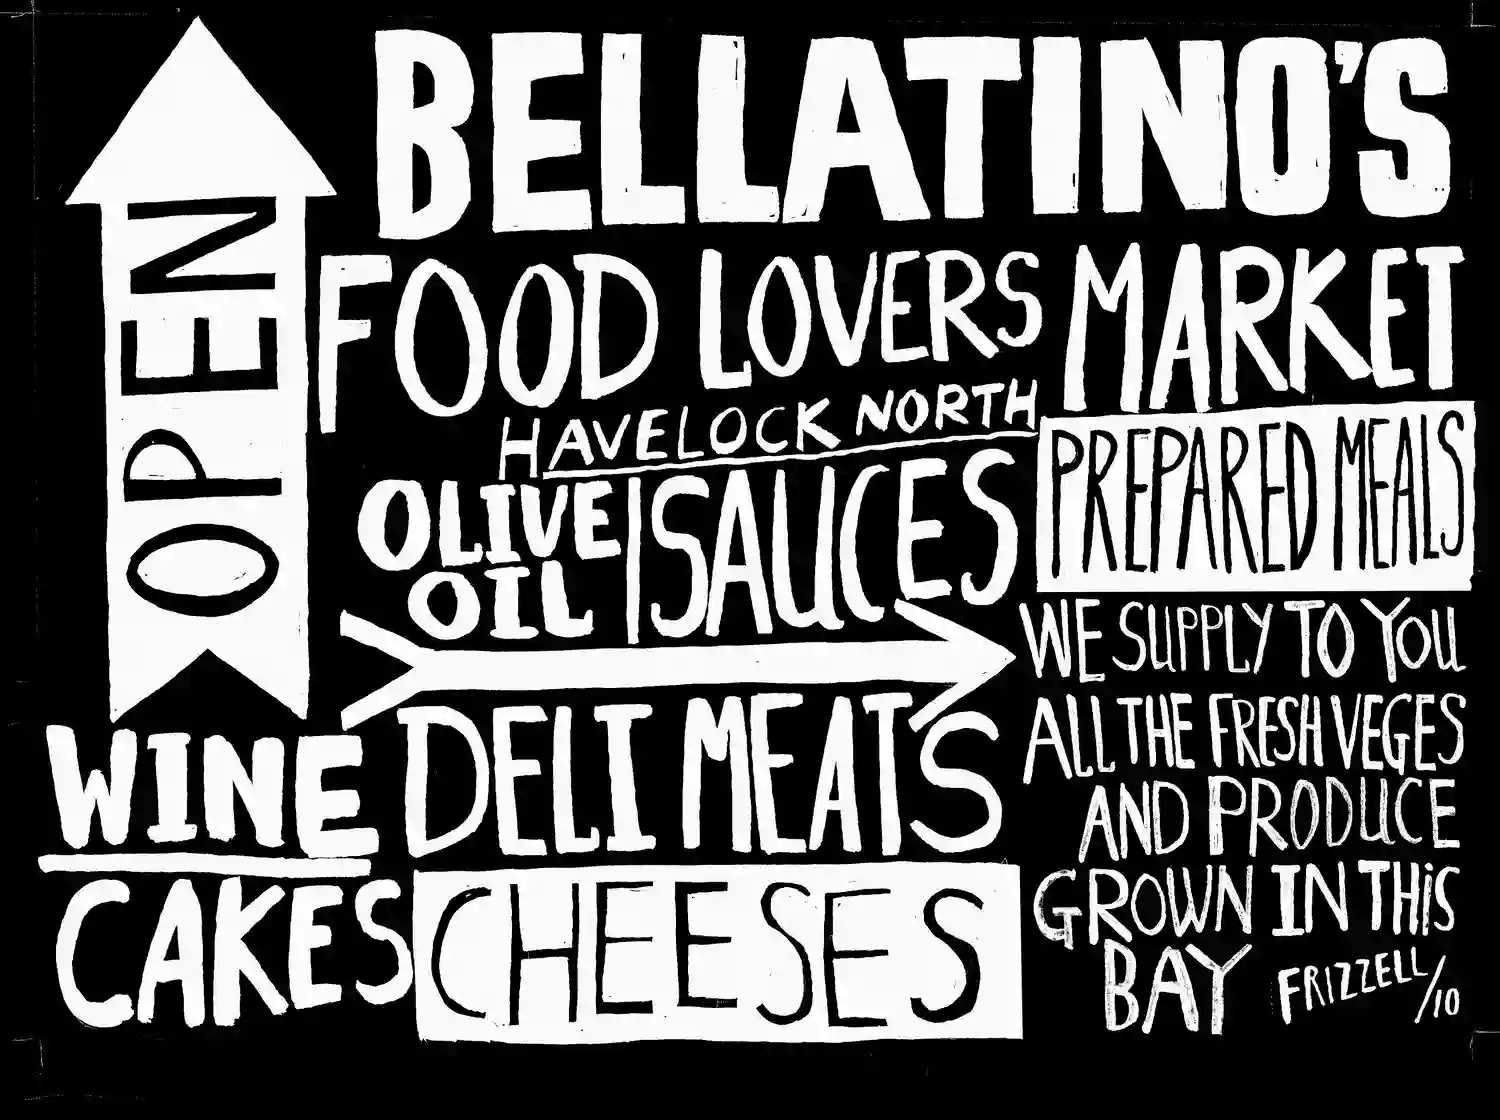 Bellatino's Food Lovers Market Bay View